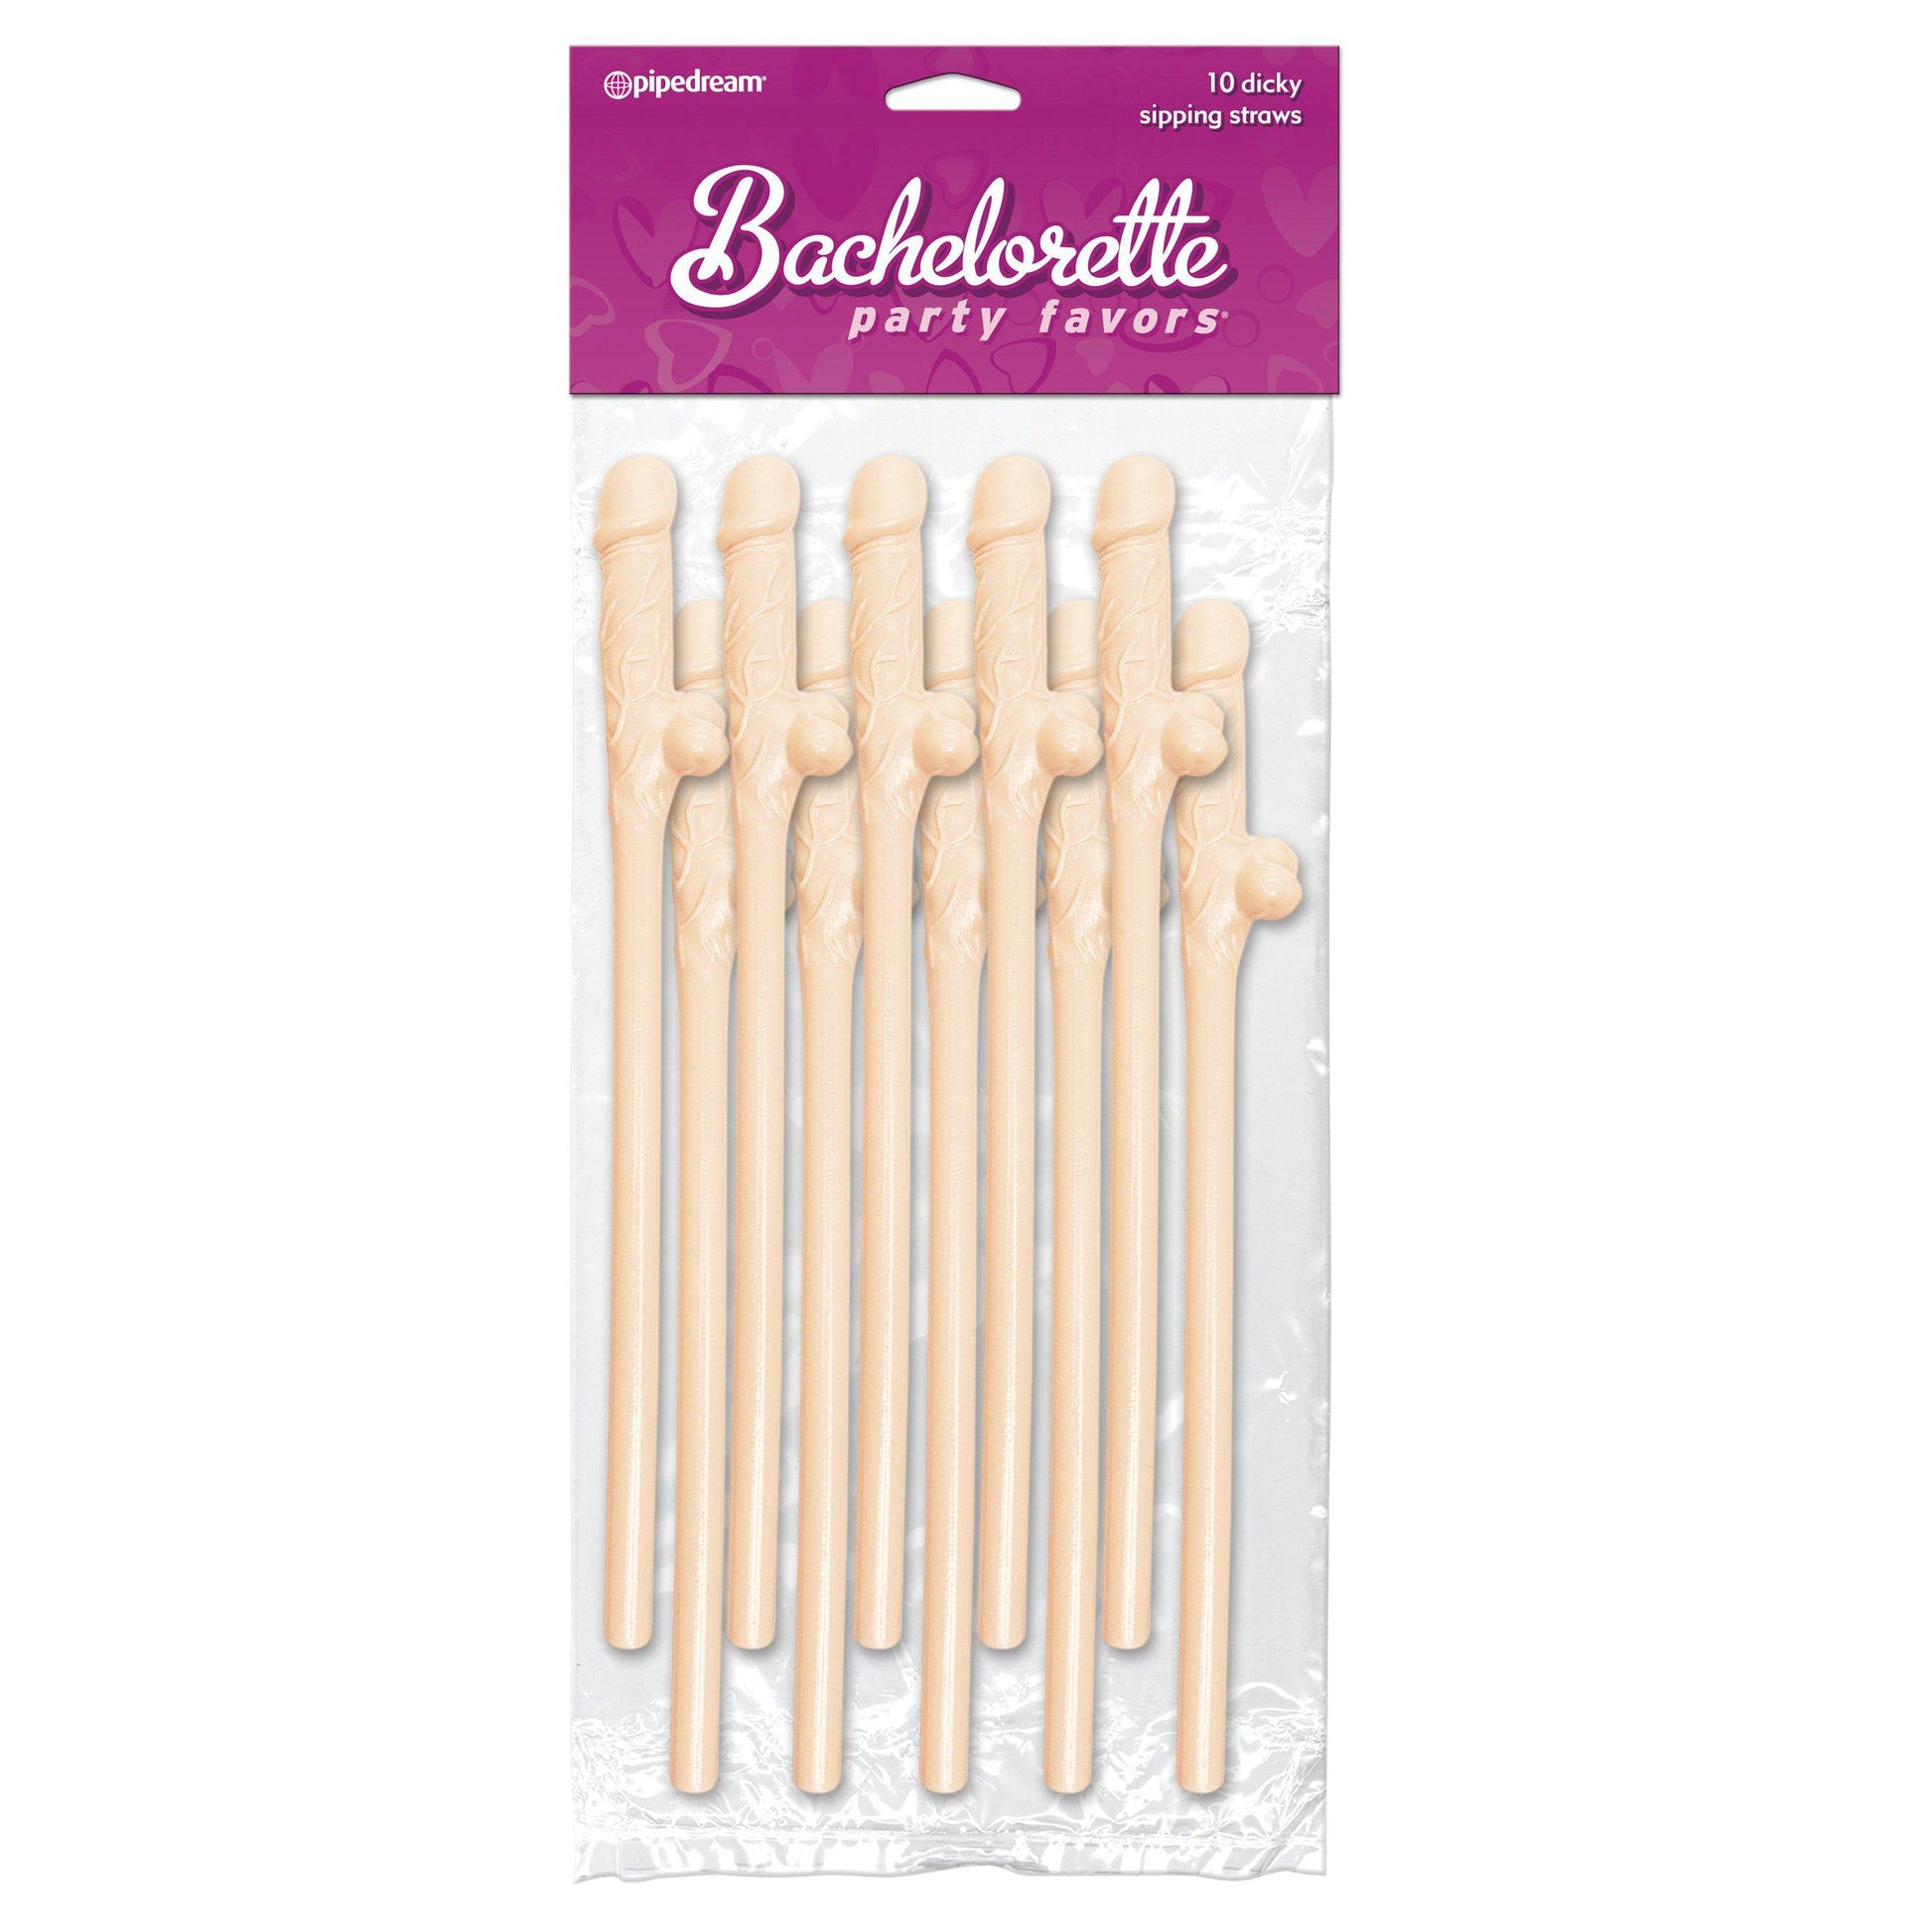 Bachelorette Party Favors - Dicky Sipping Straws - Light - 10 Piece